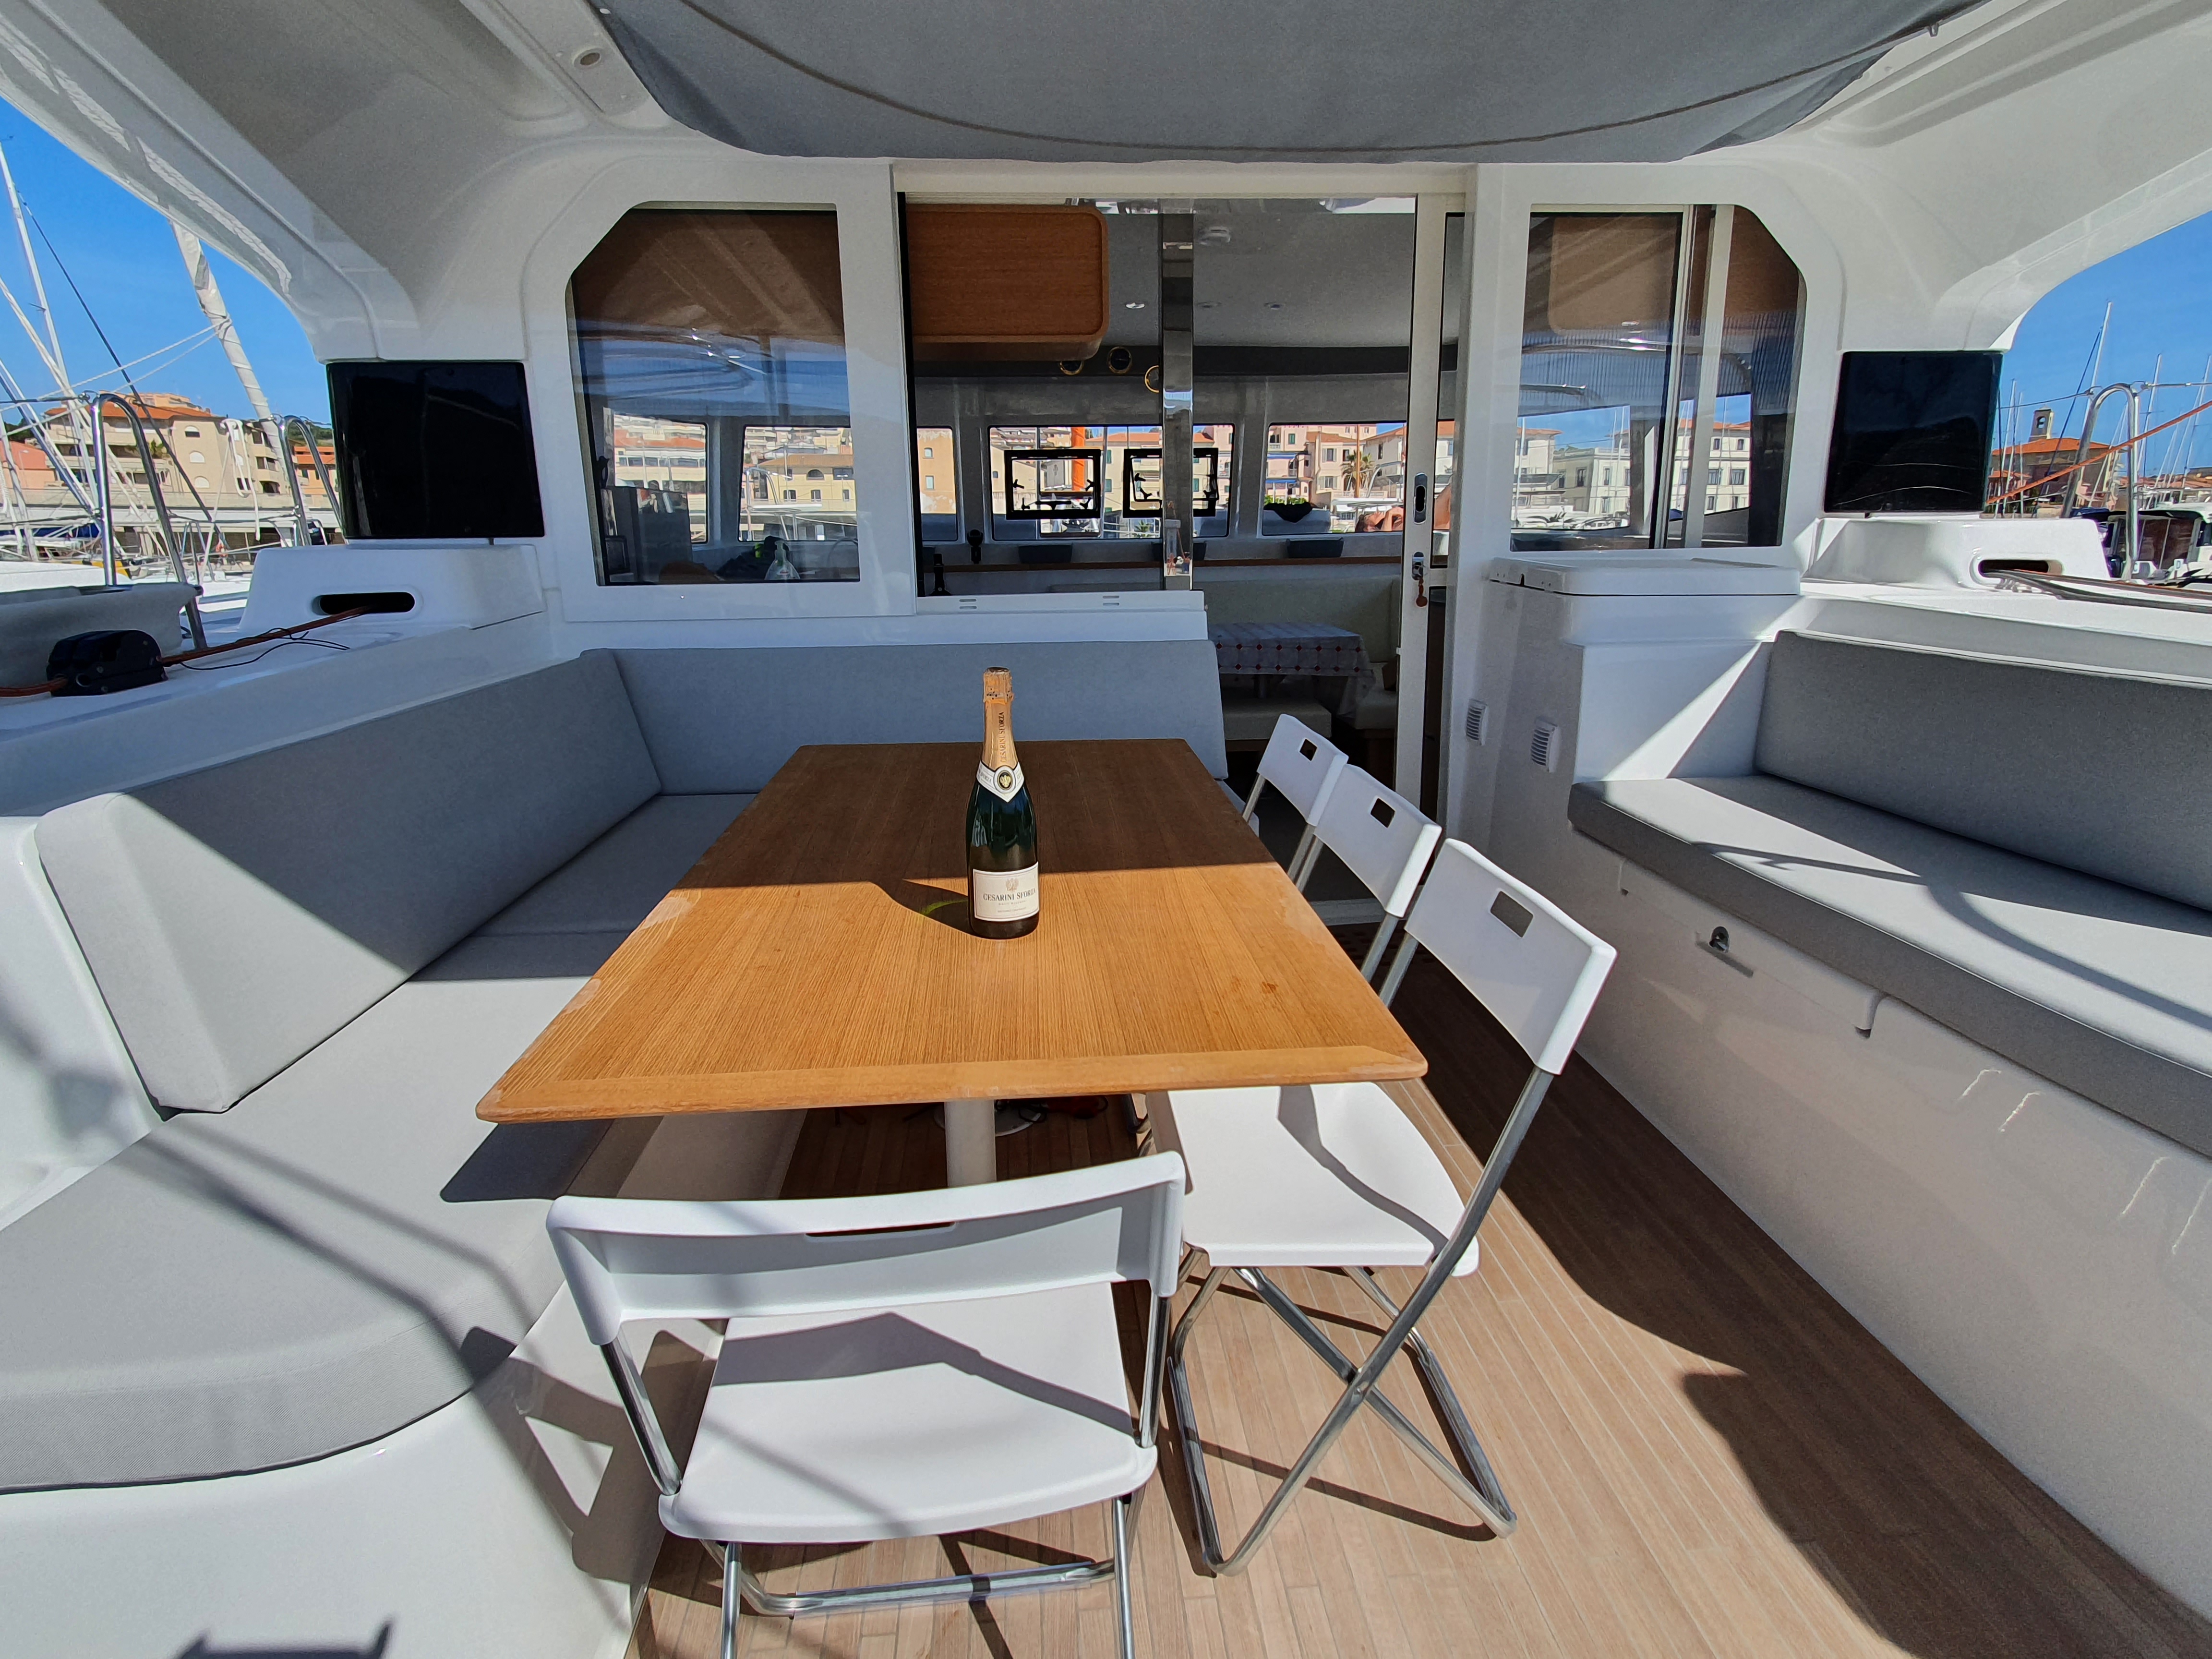 Excess 12 - Yacht Charter San Vincenzo & Boat hire in Italy San Vincenzo Marina di San Vincenzo 4